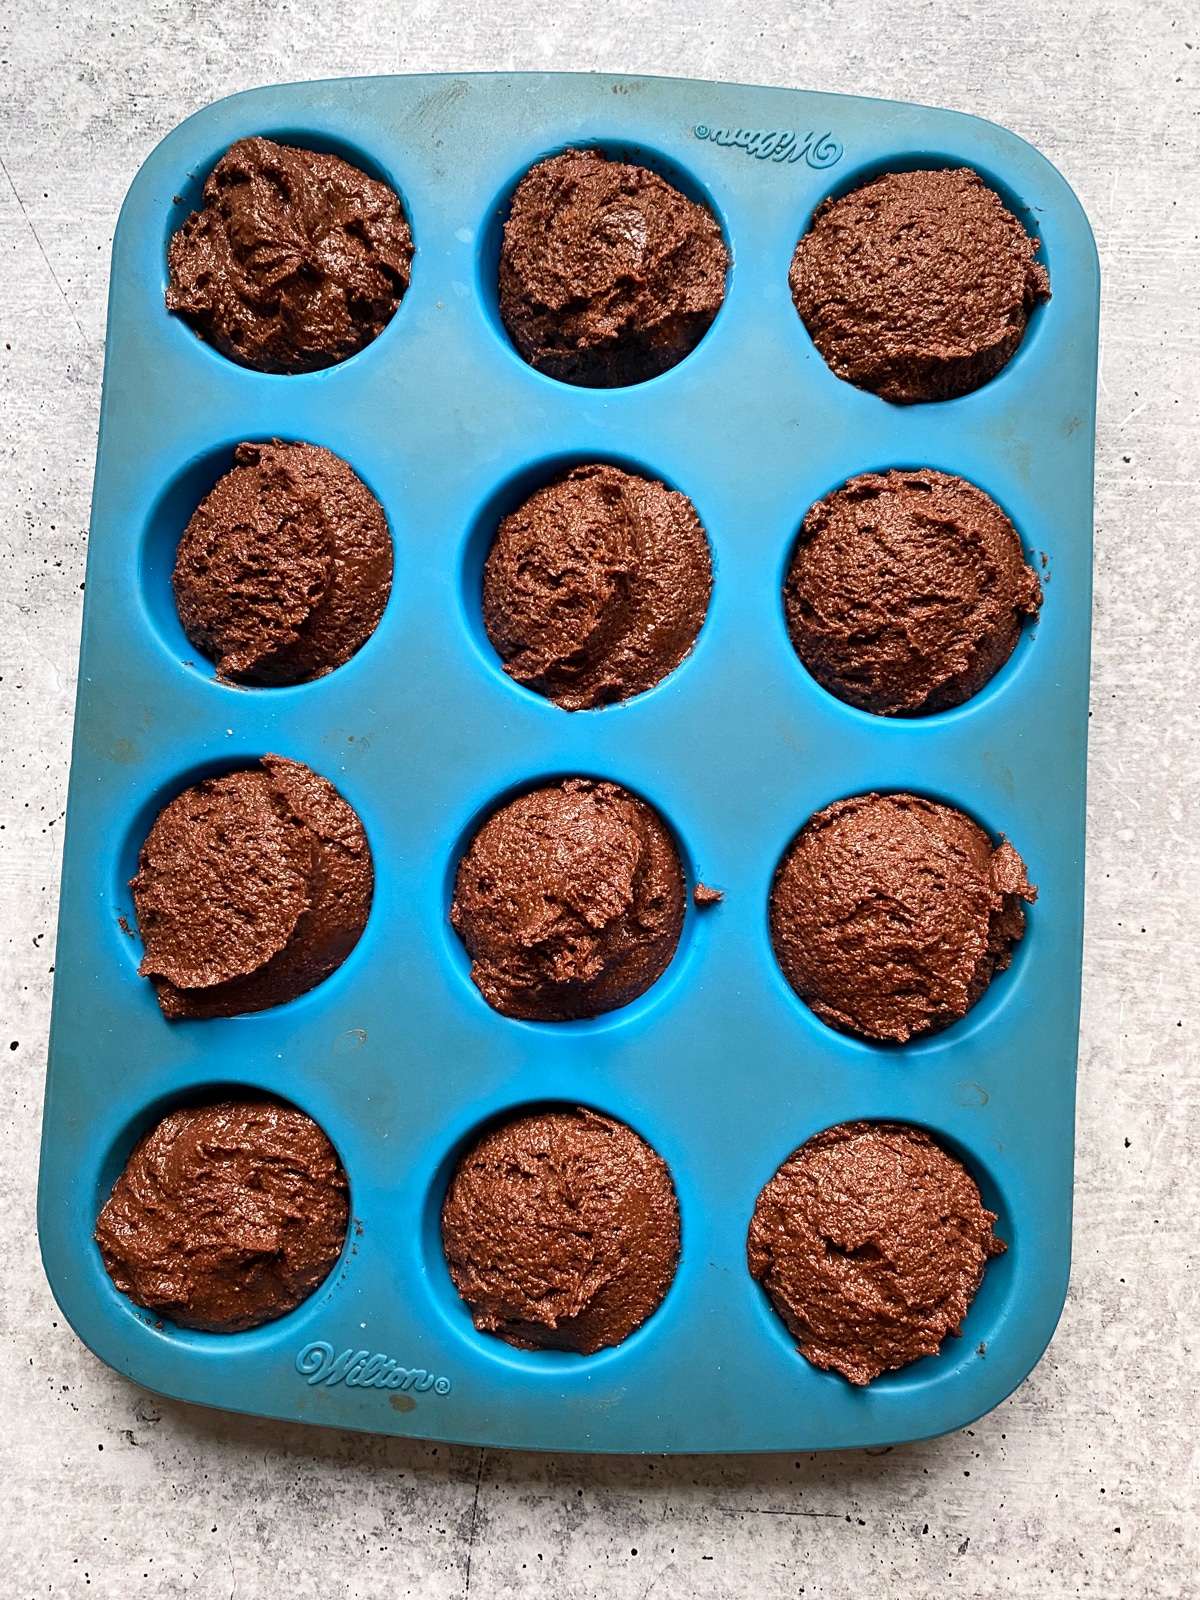 unbaked muffins in silicone baking pan